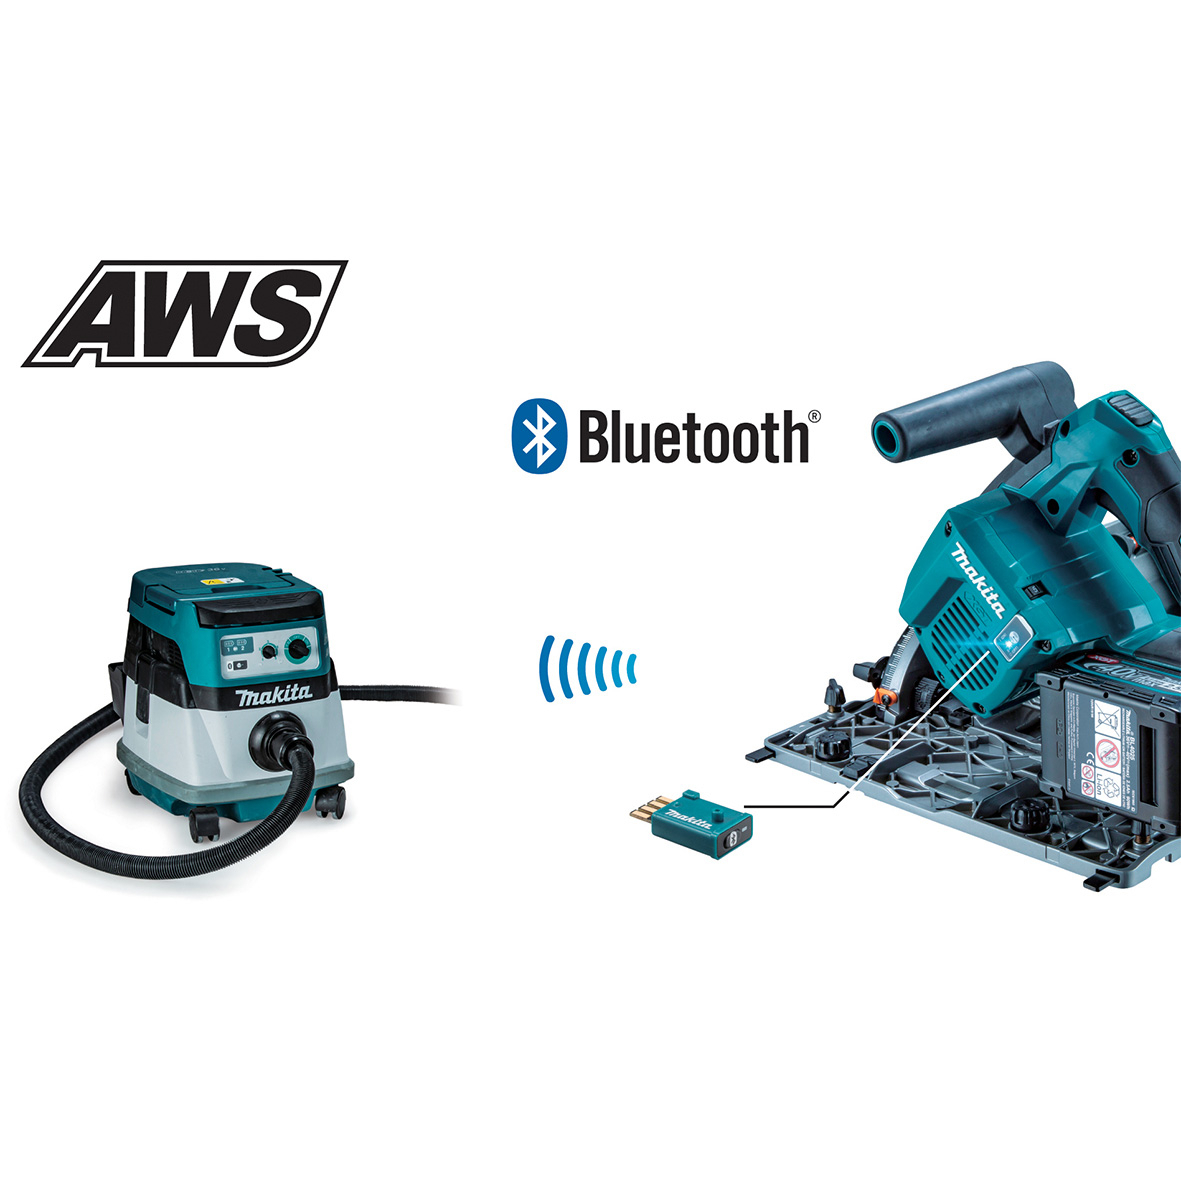 Makita 40V Max Brushless AWS 165mm (6-1/2") Plunge Cut Saw (tool only) SP001GZ03